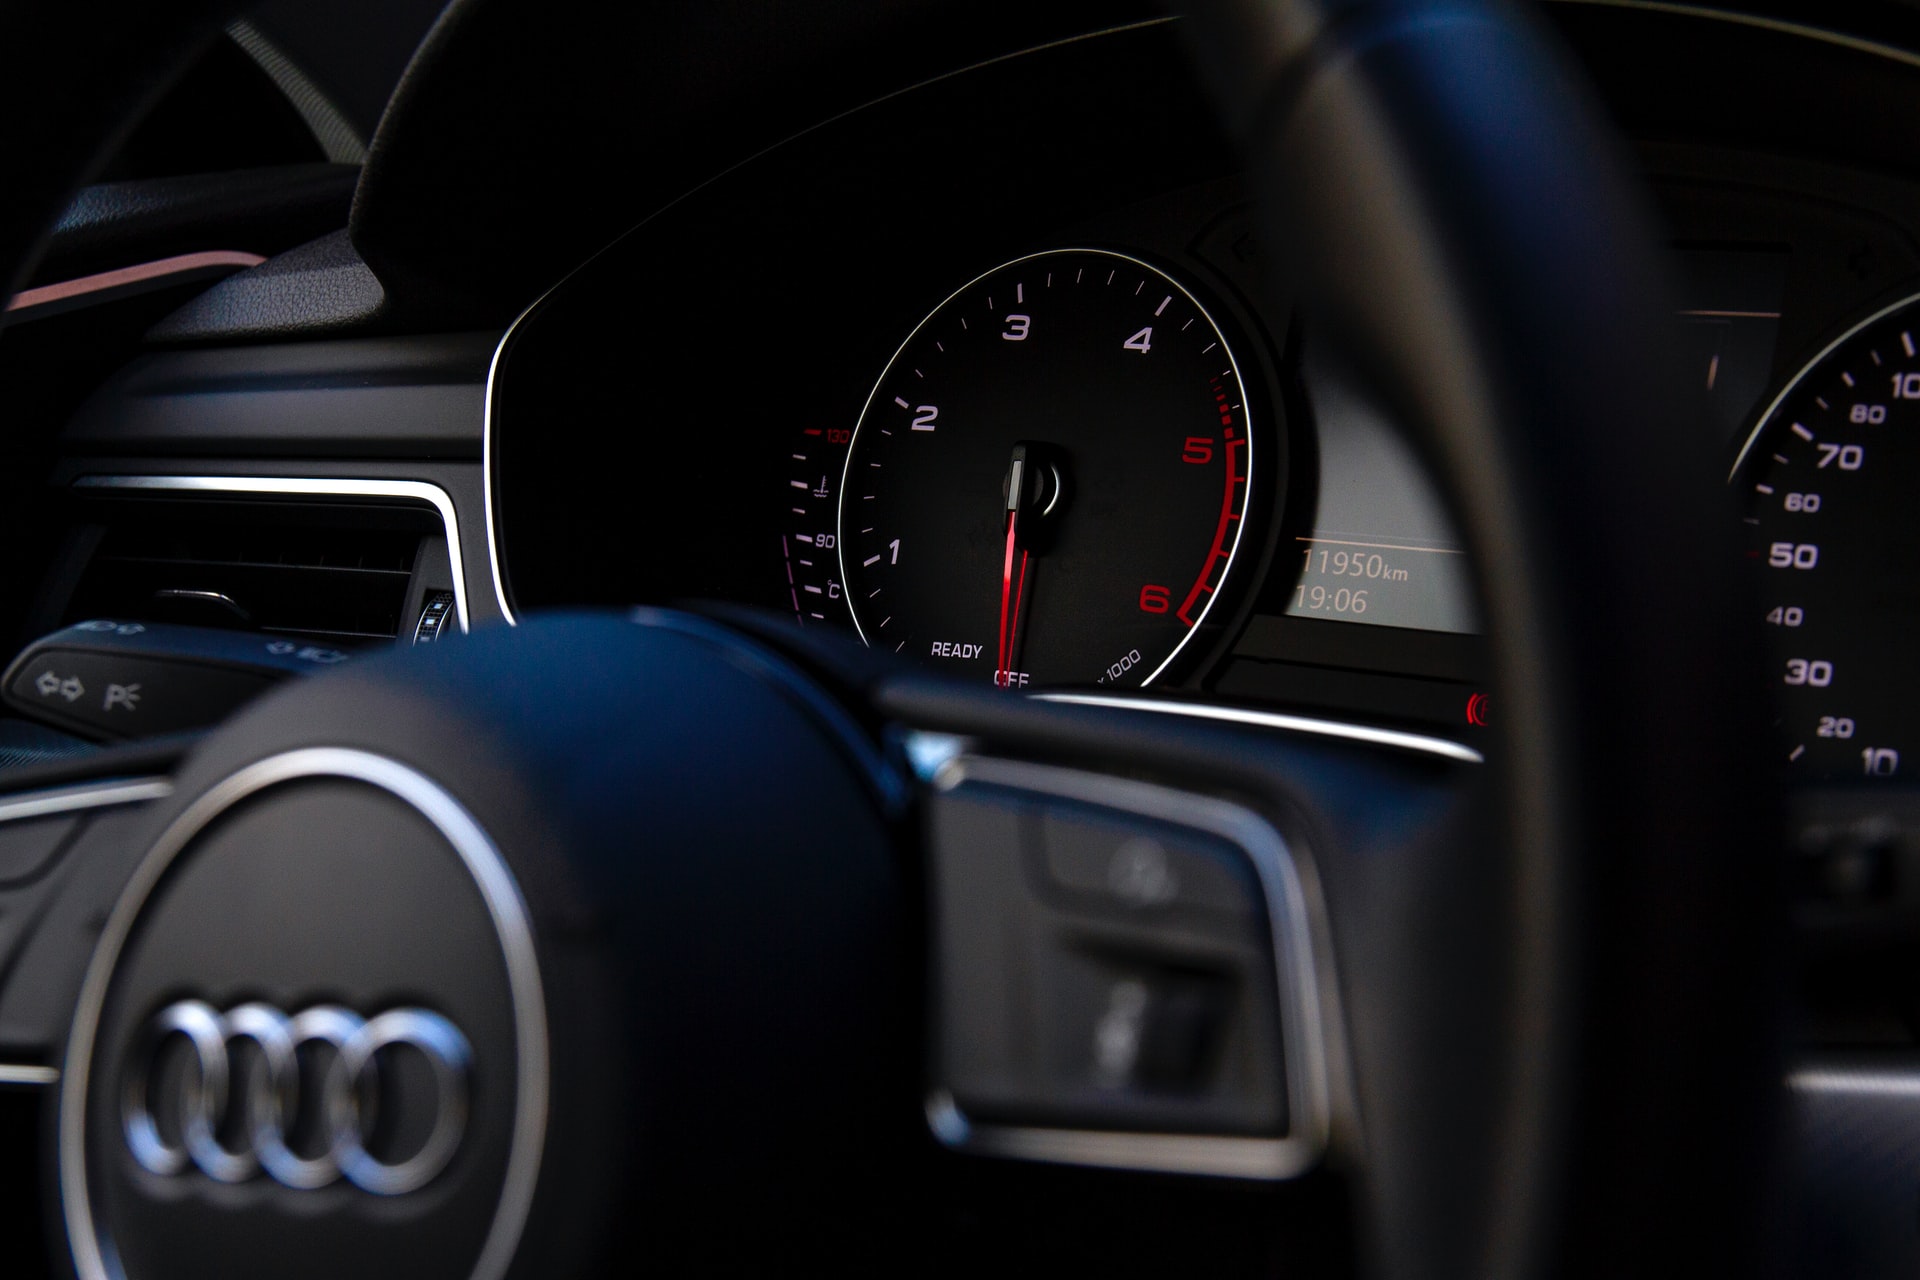 The best car tracker for your Audi